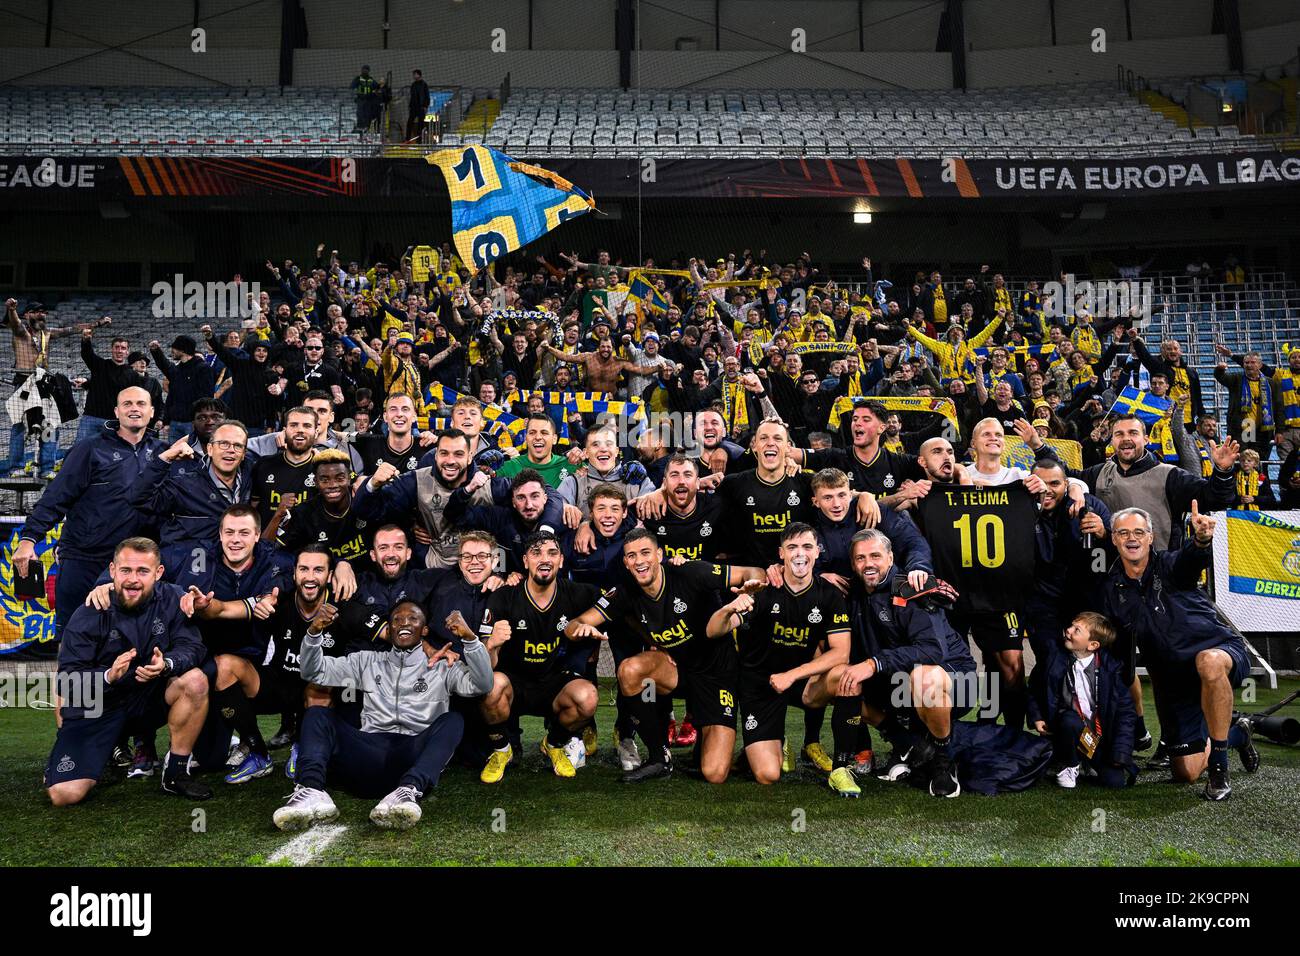 Union's players celebrates after winning a soccer game between Swedish Malmo Fotbollforening and Belgian Royale Union Saint-Gilloise, Thursday 27 October 2022 in Malmo, on day 5 of the UEFA Europa League group stage. BELGA PHOTO LAURIE DIEFFEMBACQ Credit: Belga News Agency/Alamy Live News Stock Photo